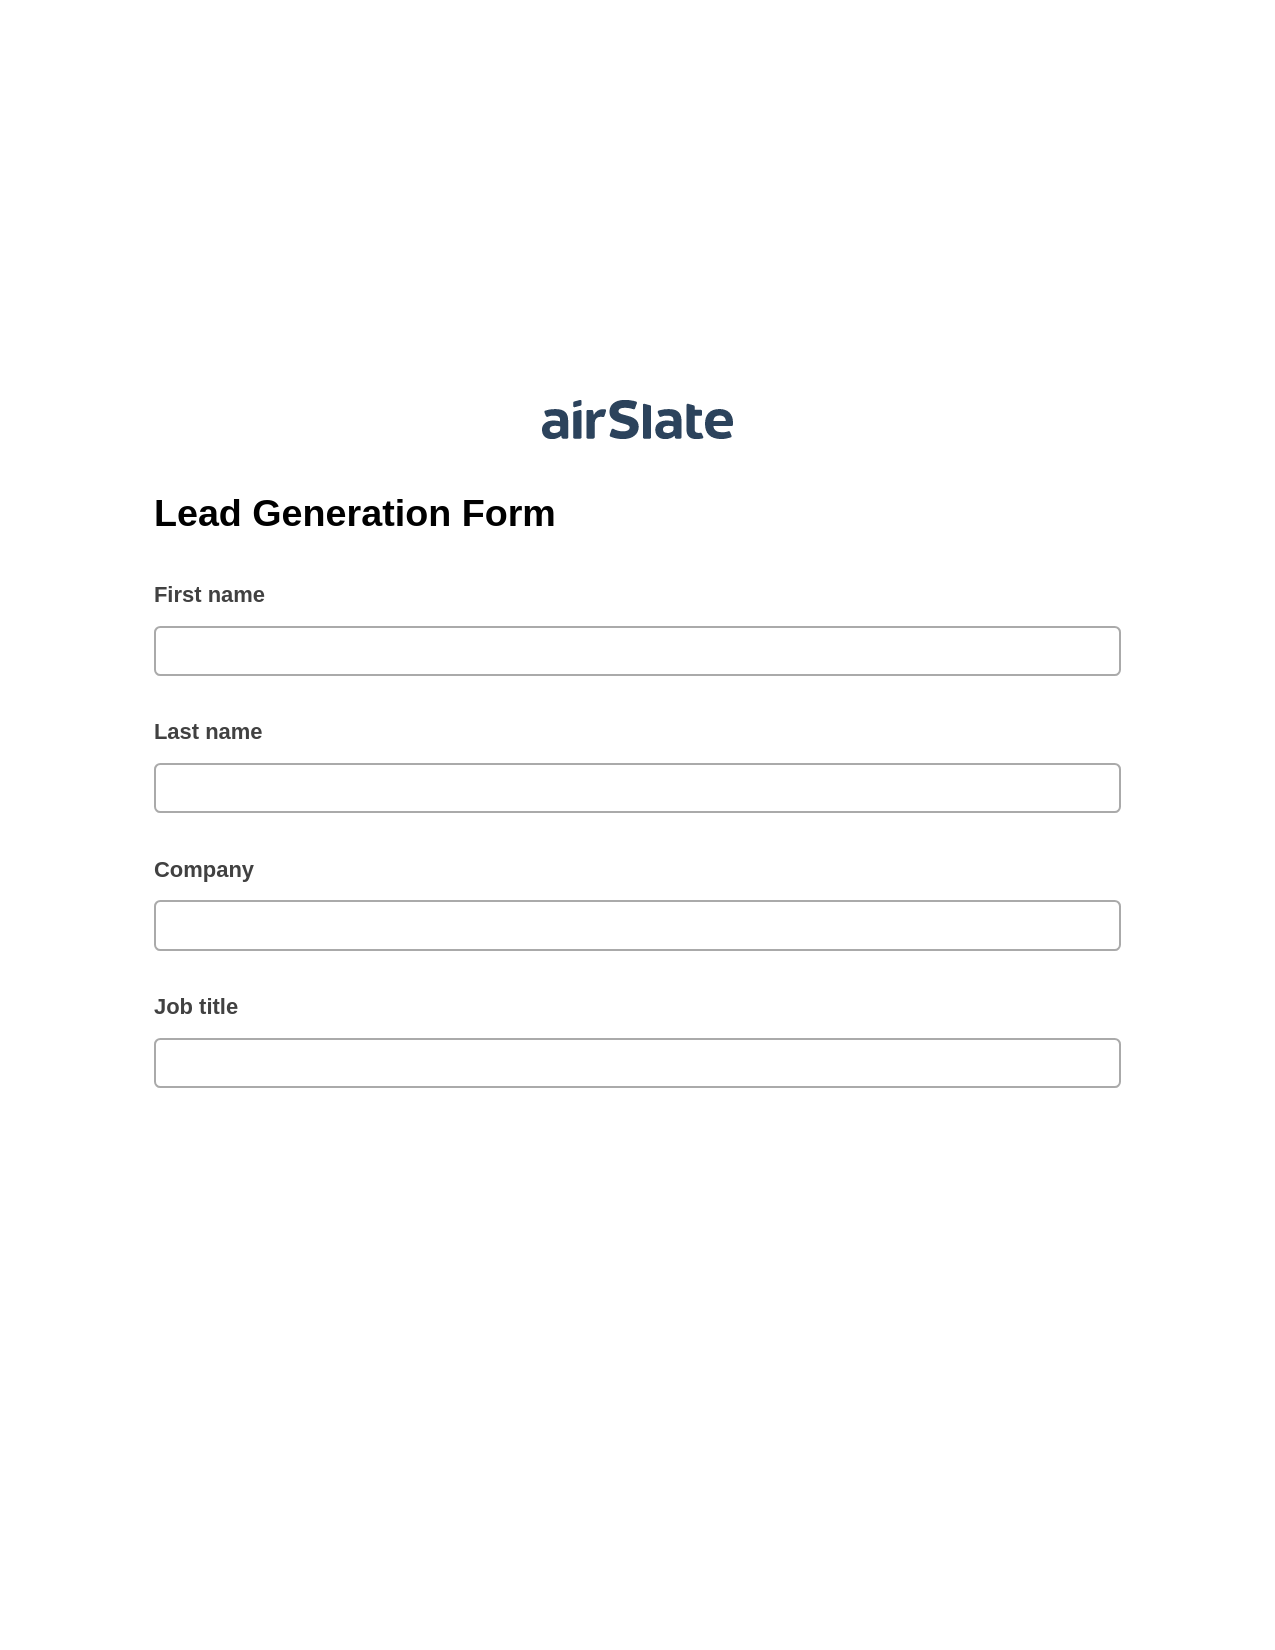 Lead Generation Form Pre-fill from Google Sheets Bot, Send a Slate with Roles Bot, Archive to SharePoint Folder Bot